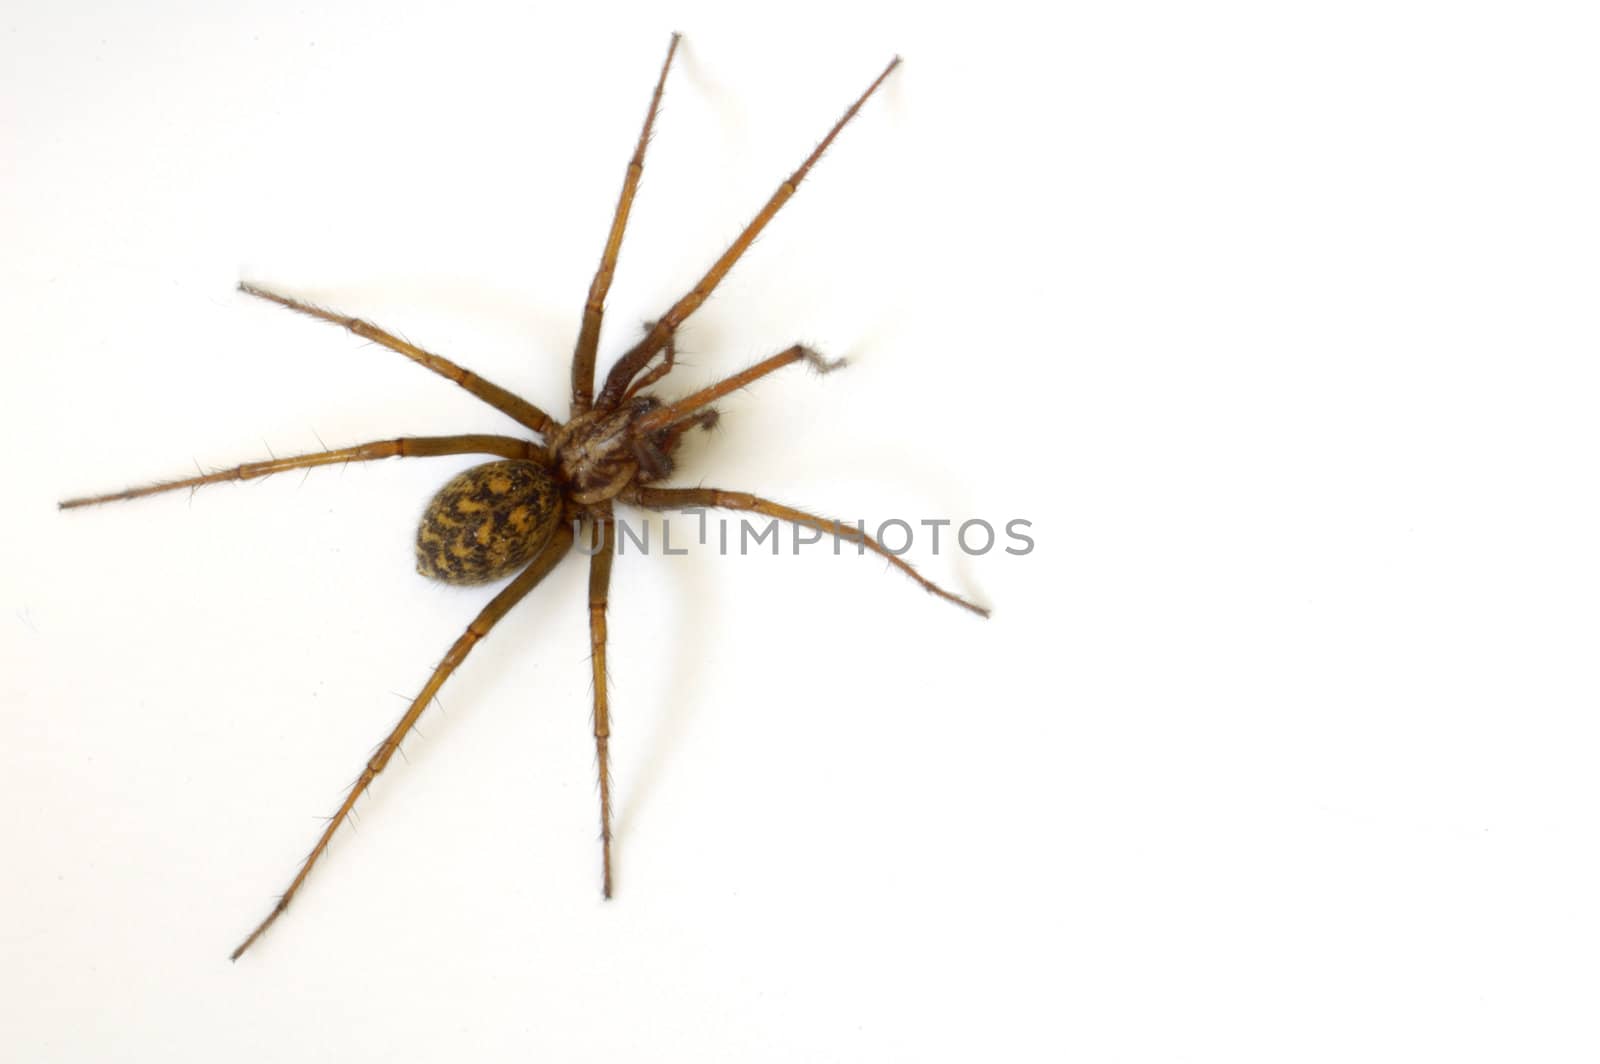 A common house spider (Tegenaria gigantea) isolated on a white background.